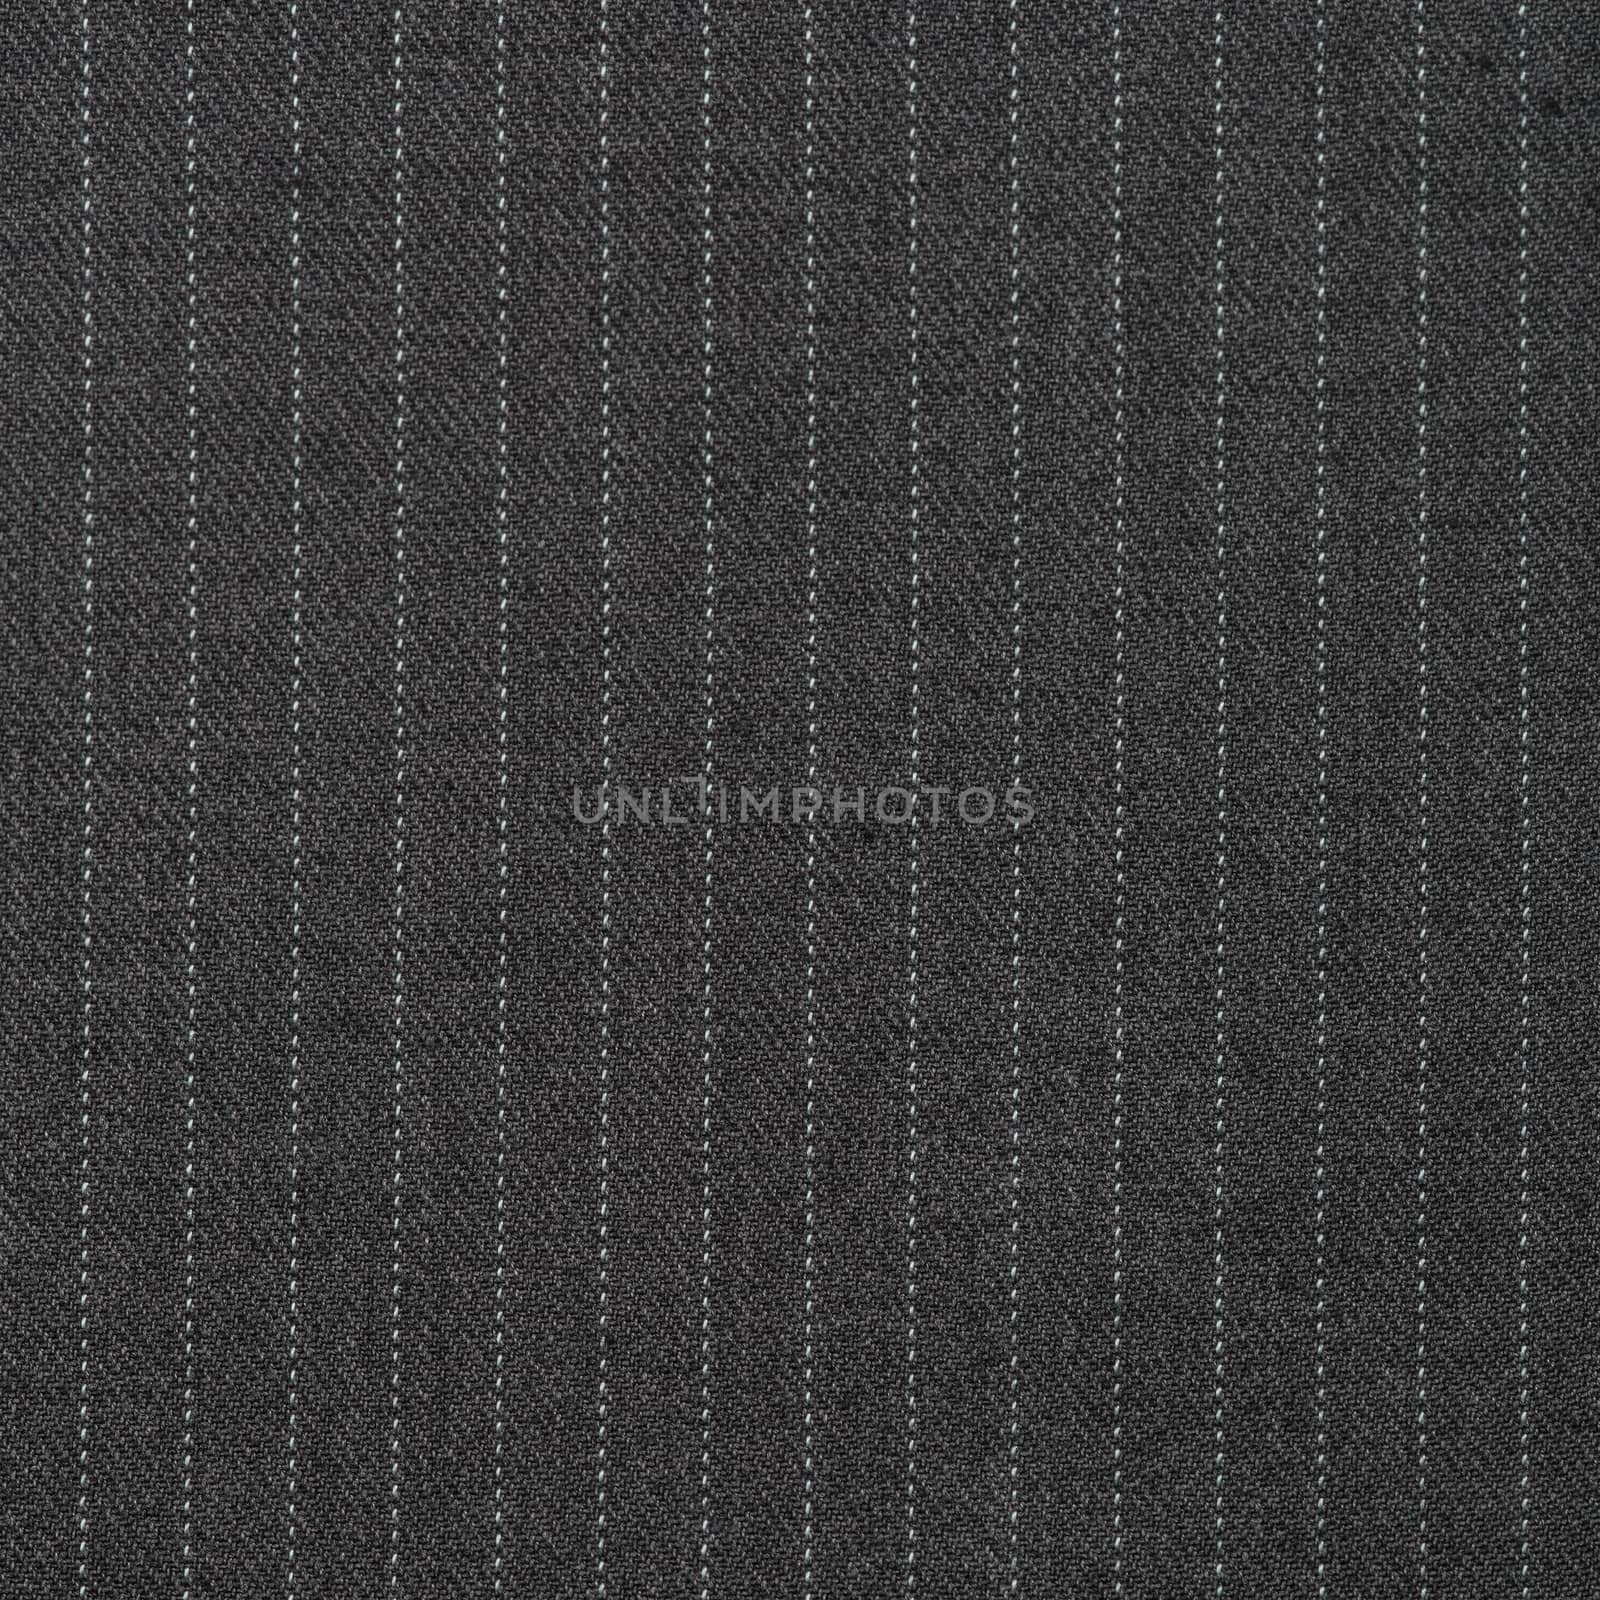 Fabric samples texture gray and white collar macro photography by praethip